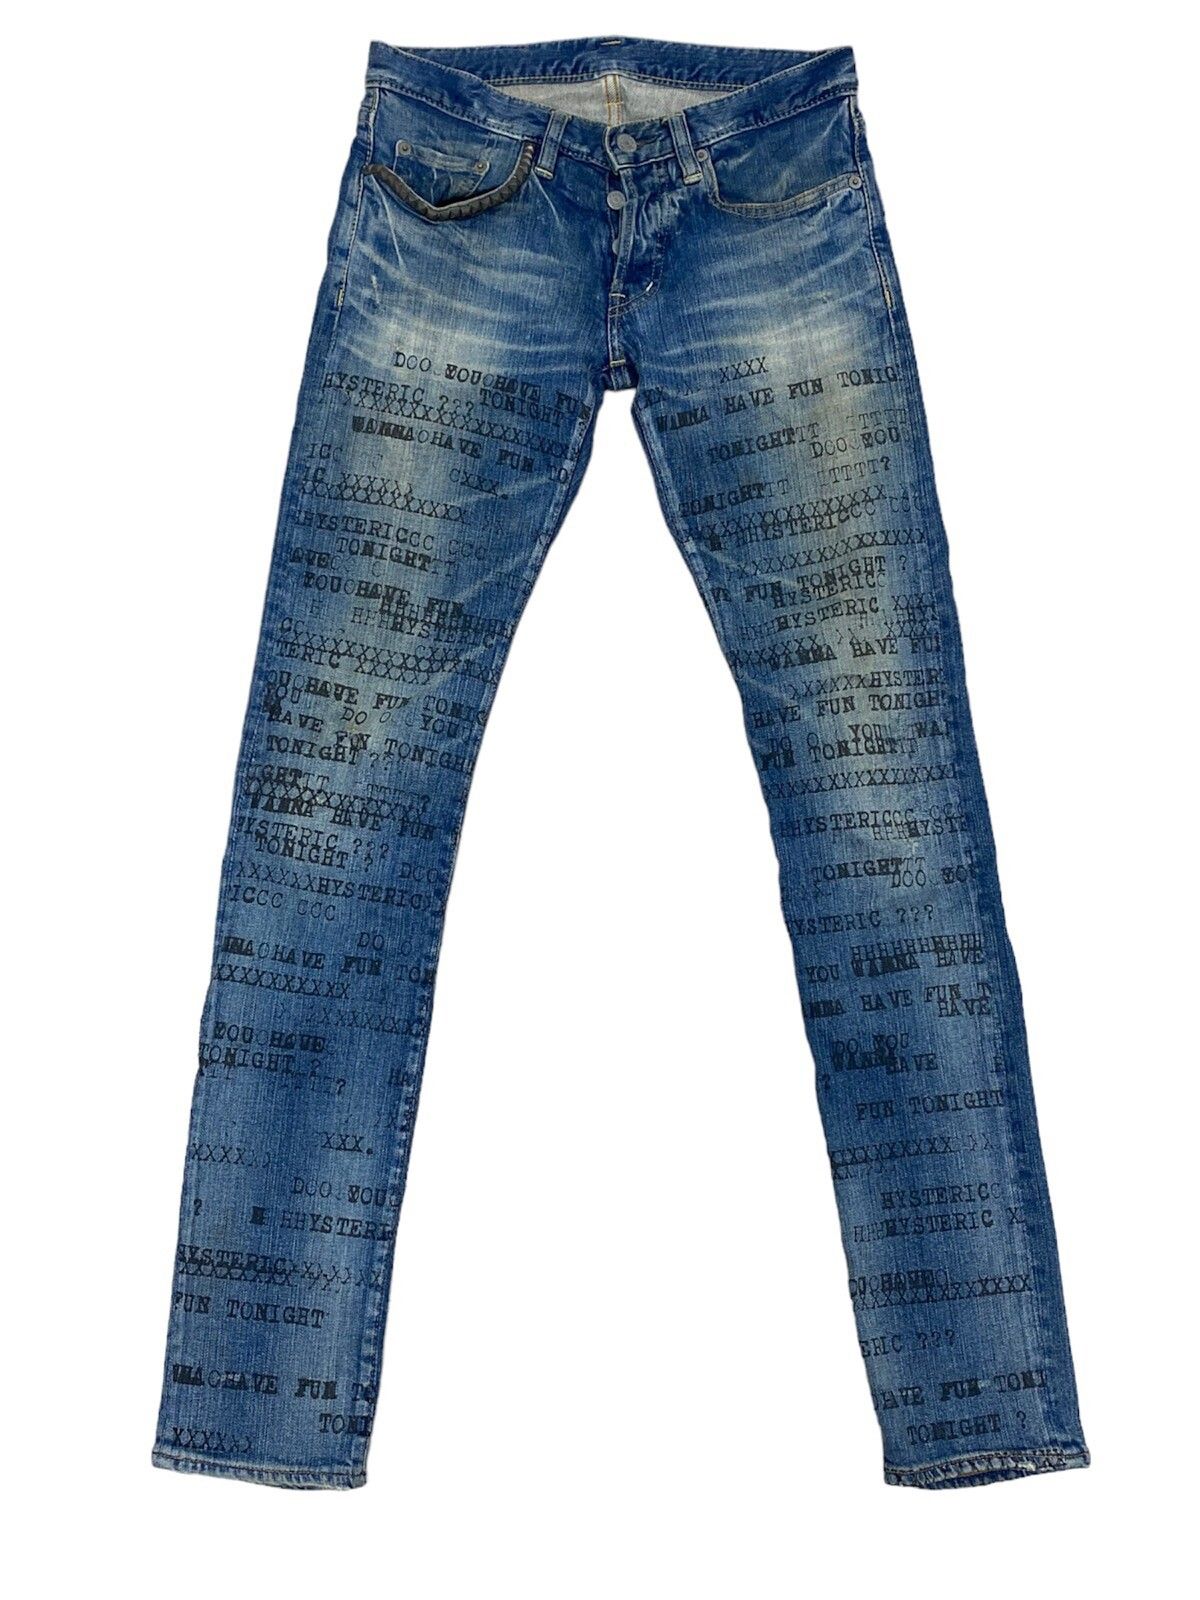 Hysteric Glamour "Do You Wanna Have Fun Tonight” Denim Jeans - 1